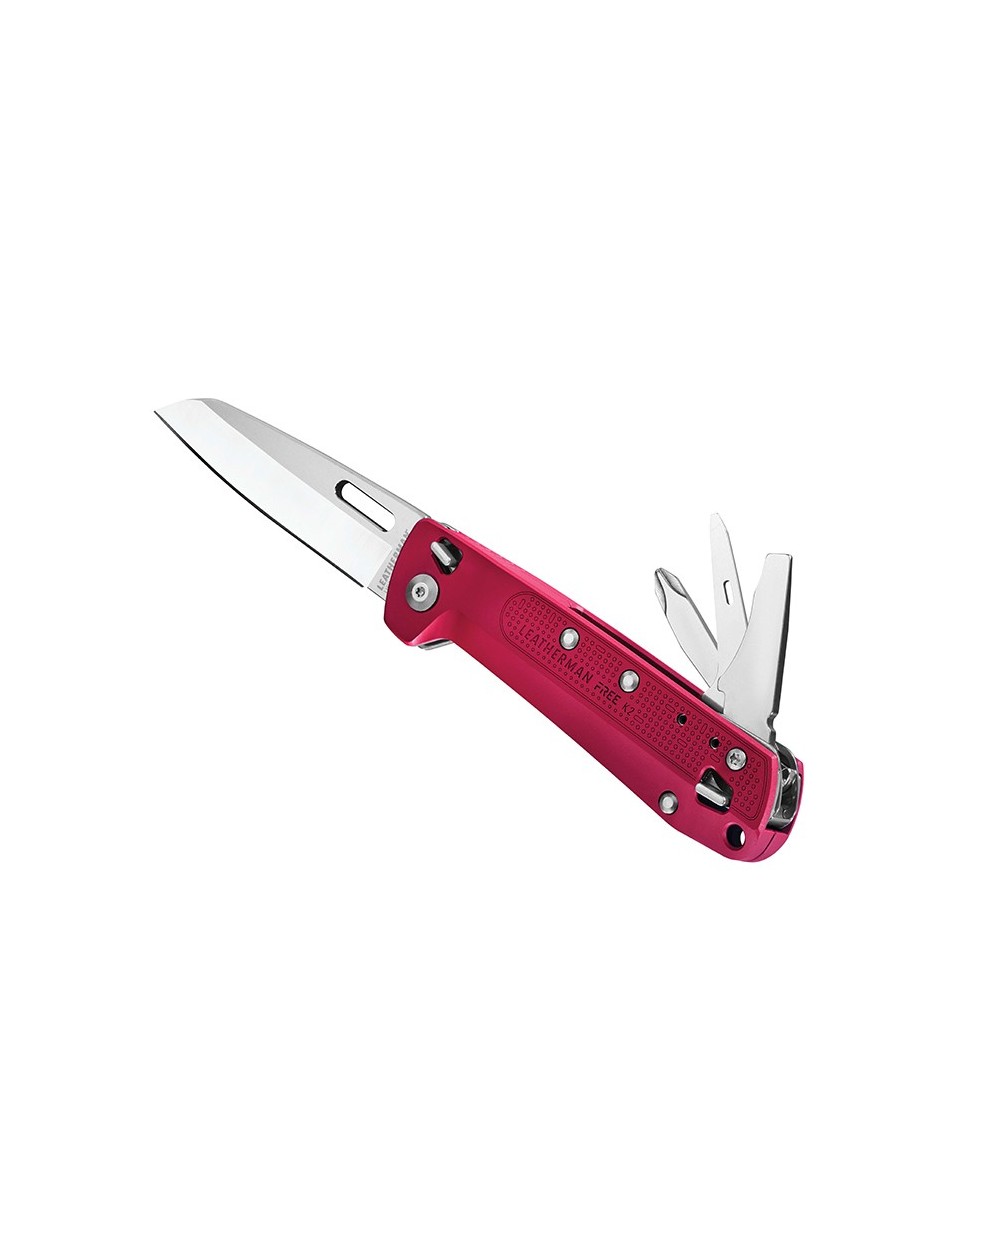 leatherman-pince-multifonctions-free-k2-rouge-832890-2